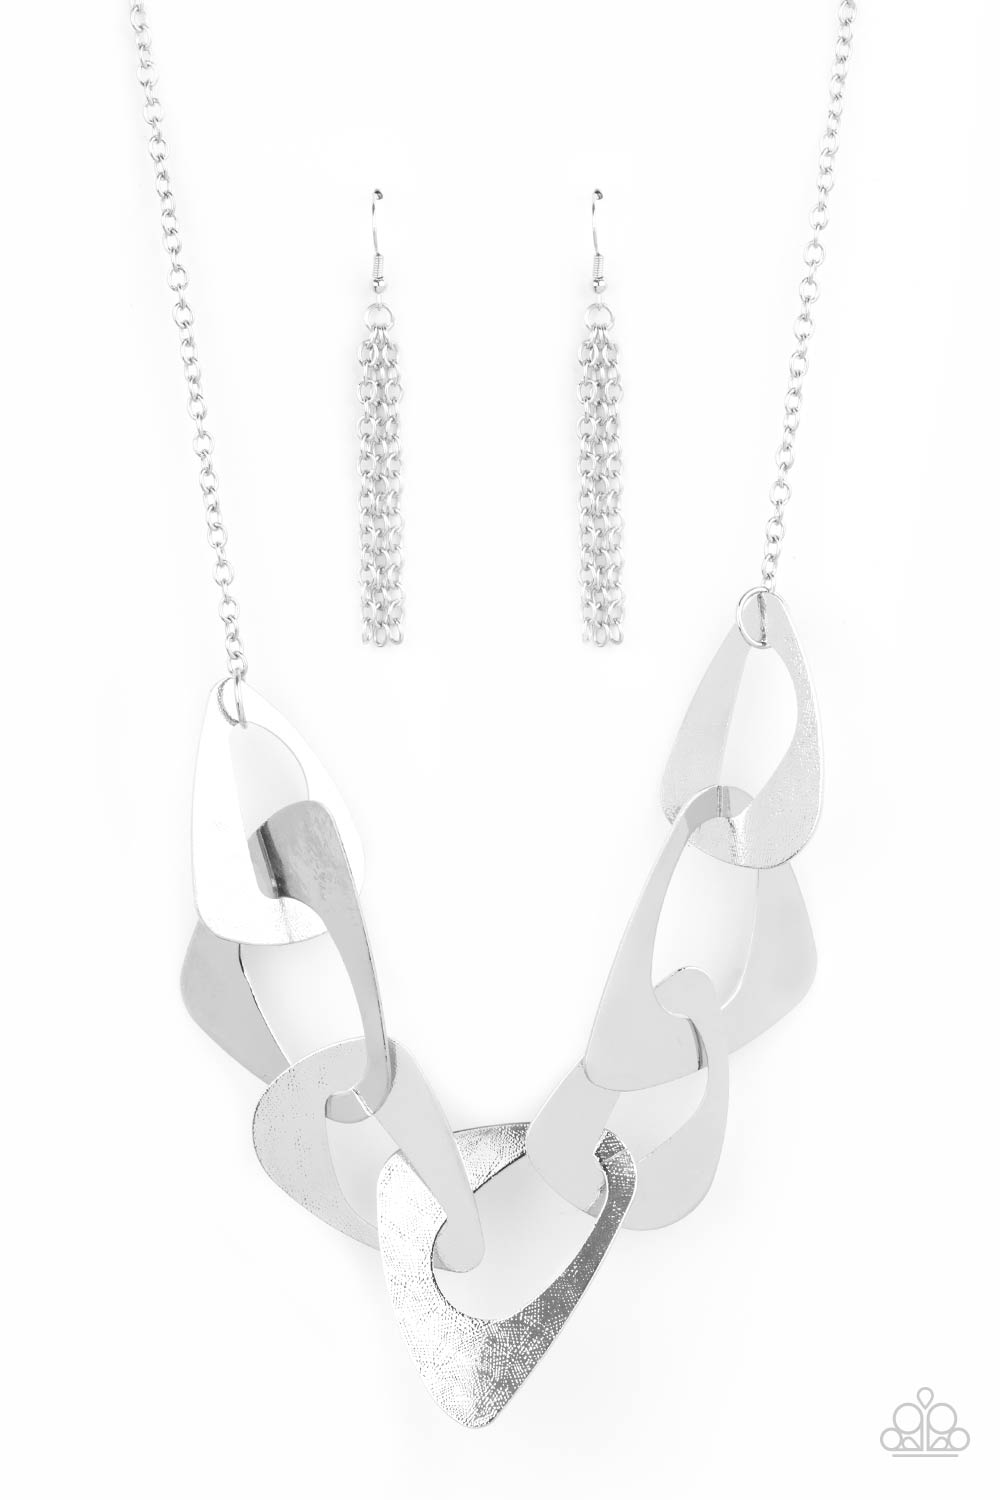 Guide to the Galaxy - Silver Triangular Necklaces - Paparazzi Accessories large triangular cutouts stamped in a lightly dotted texture link below the collar forming a dramatic display of silver slices. Features an adjustable clasp closure.  Sold as one individual necklace. Includes one pair of matching earrings.